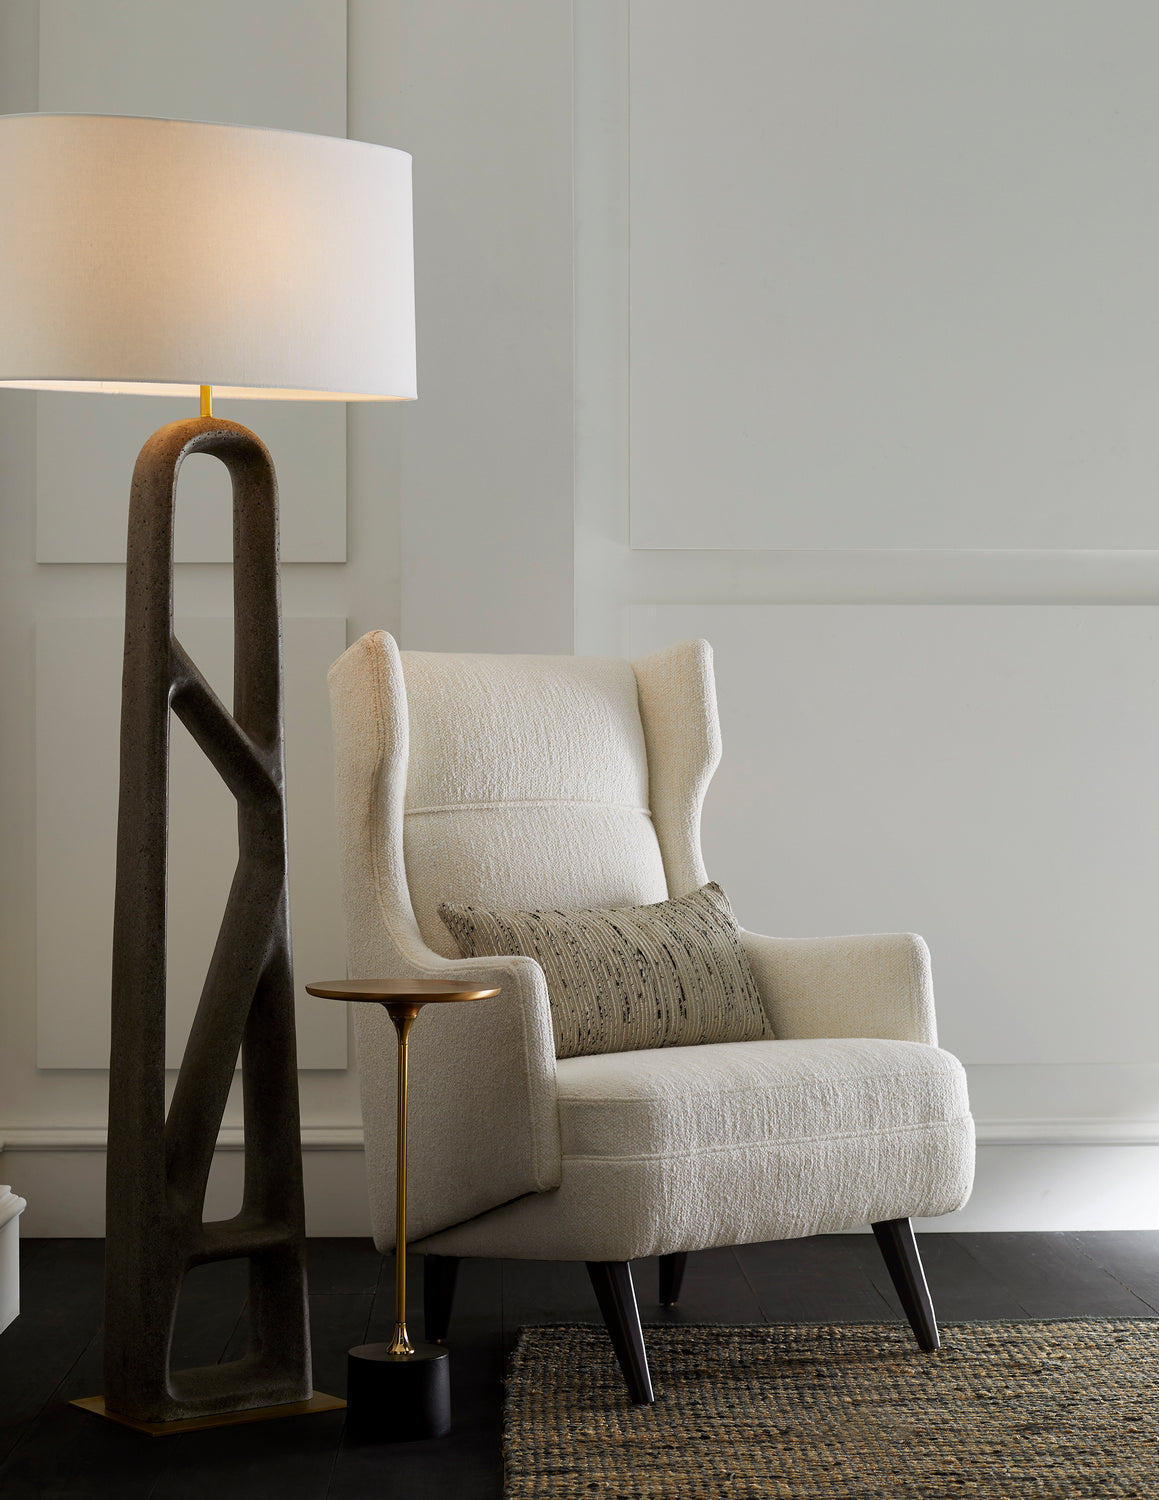 One Light Floor Lamp from the Wilcott collection in White finish